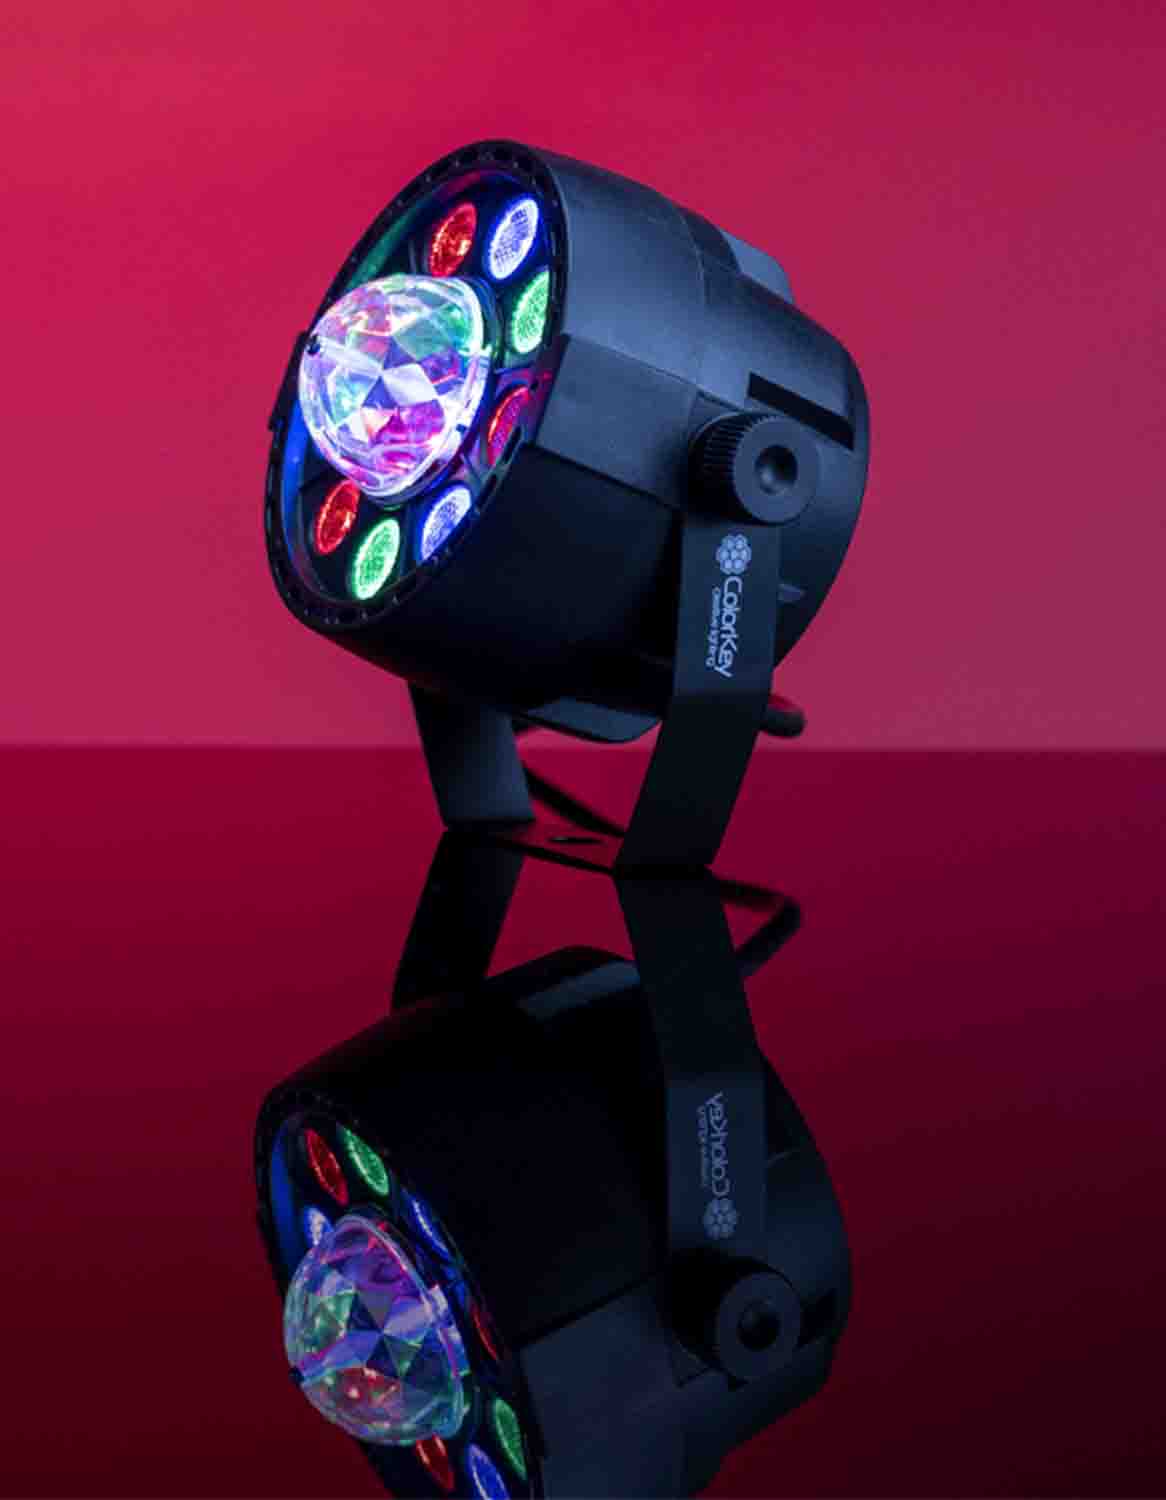 B-Stock: Colorkey CKU-1080 Party Light FX Compact LED Wash Light with Motorized RGB Party Bulb Effect - Hollywood DJ